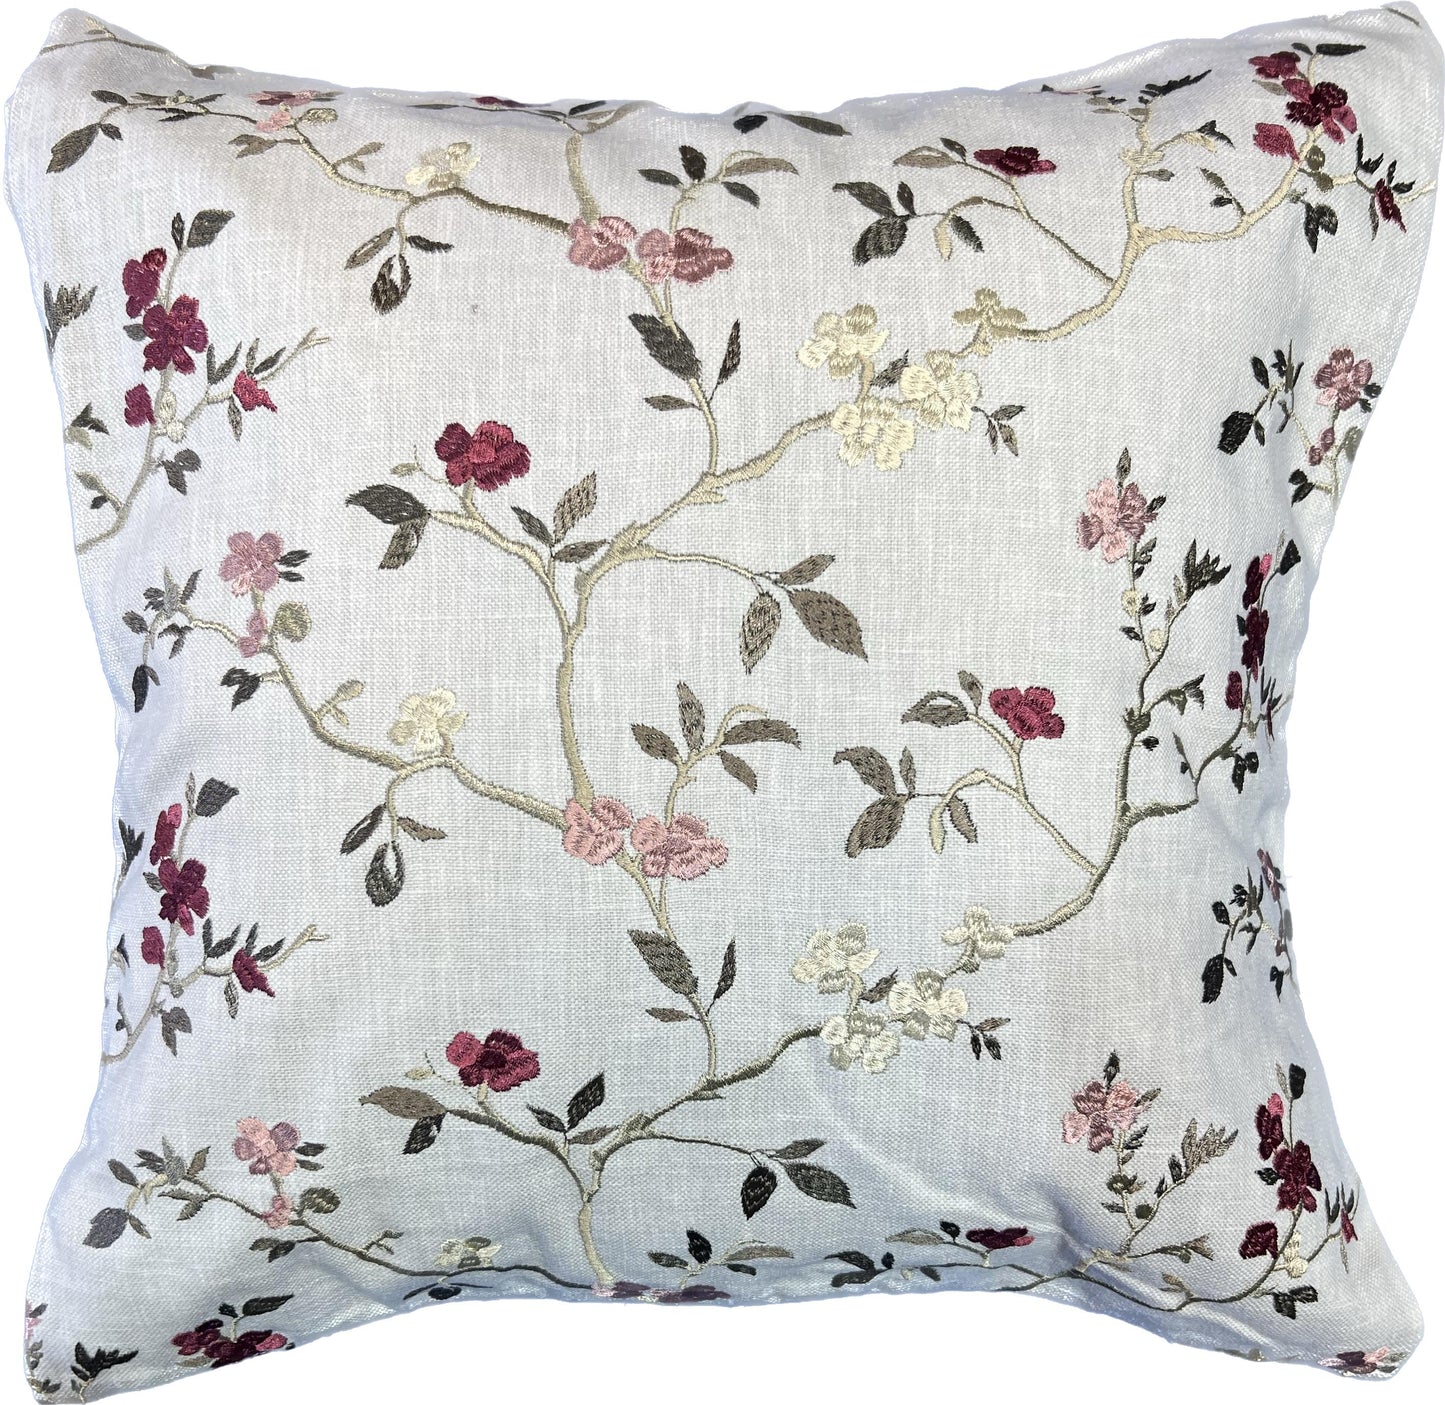 18"x18" Flowering Branches Pillow Cover